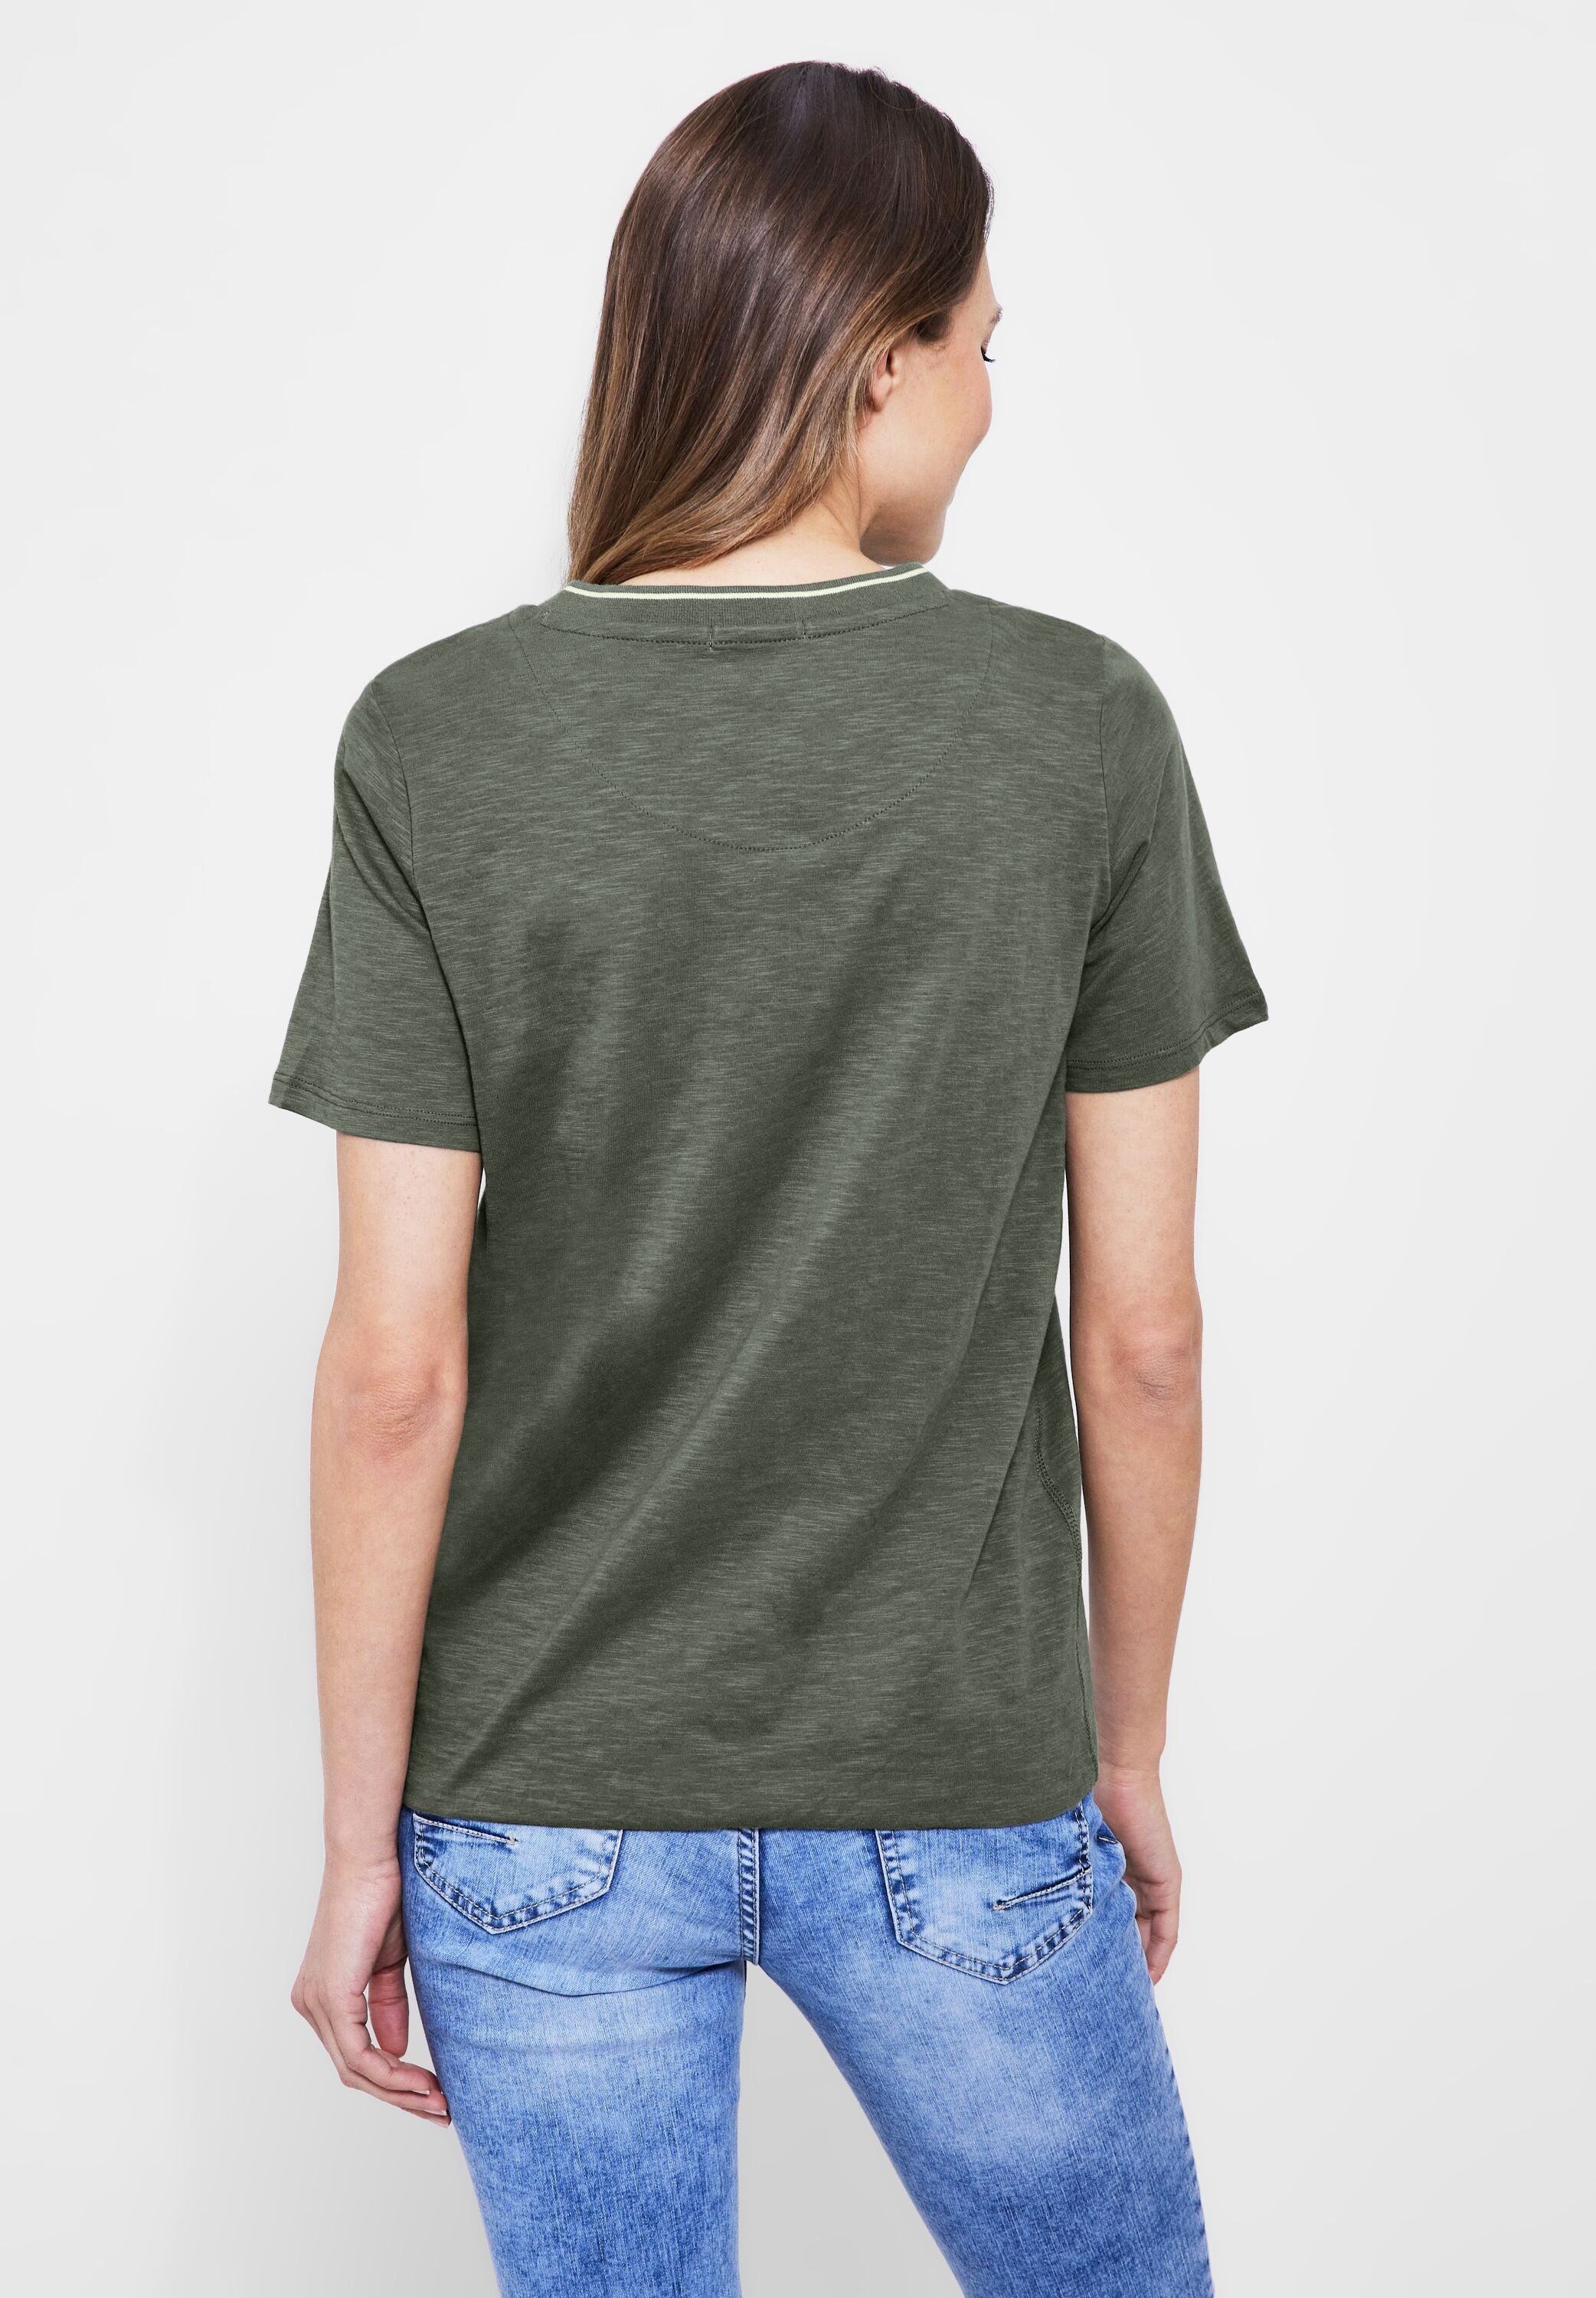 Cecil in desert green 3/4-Arm-Shirt Unifarbe olive